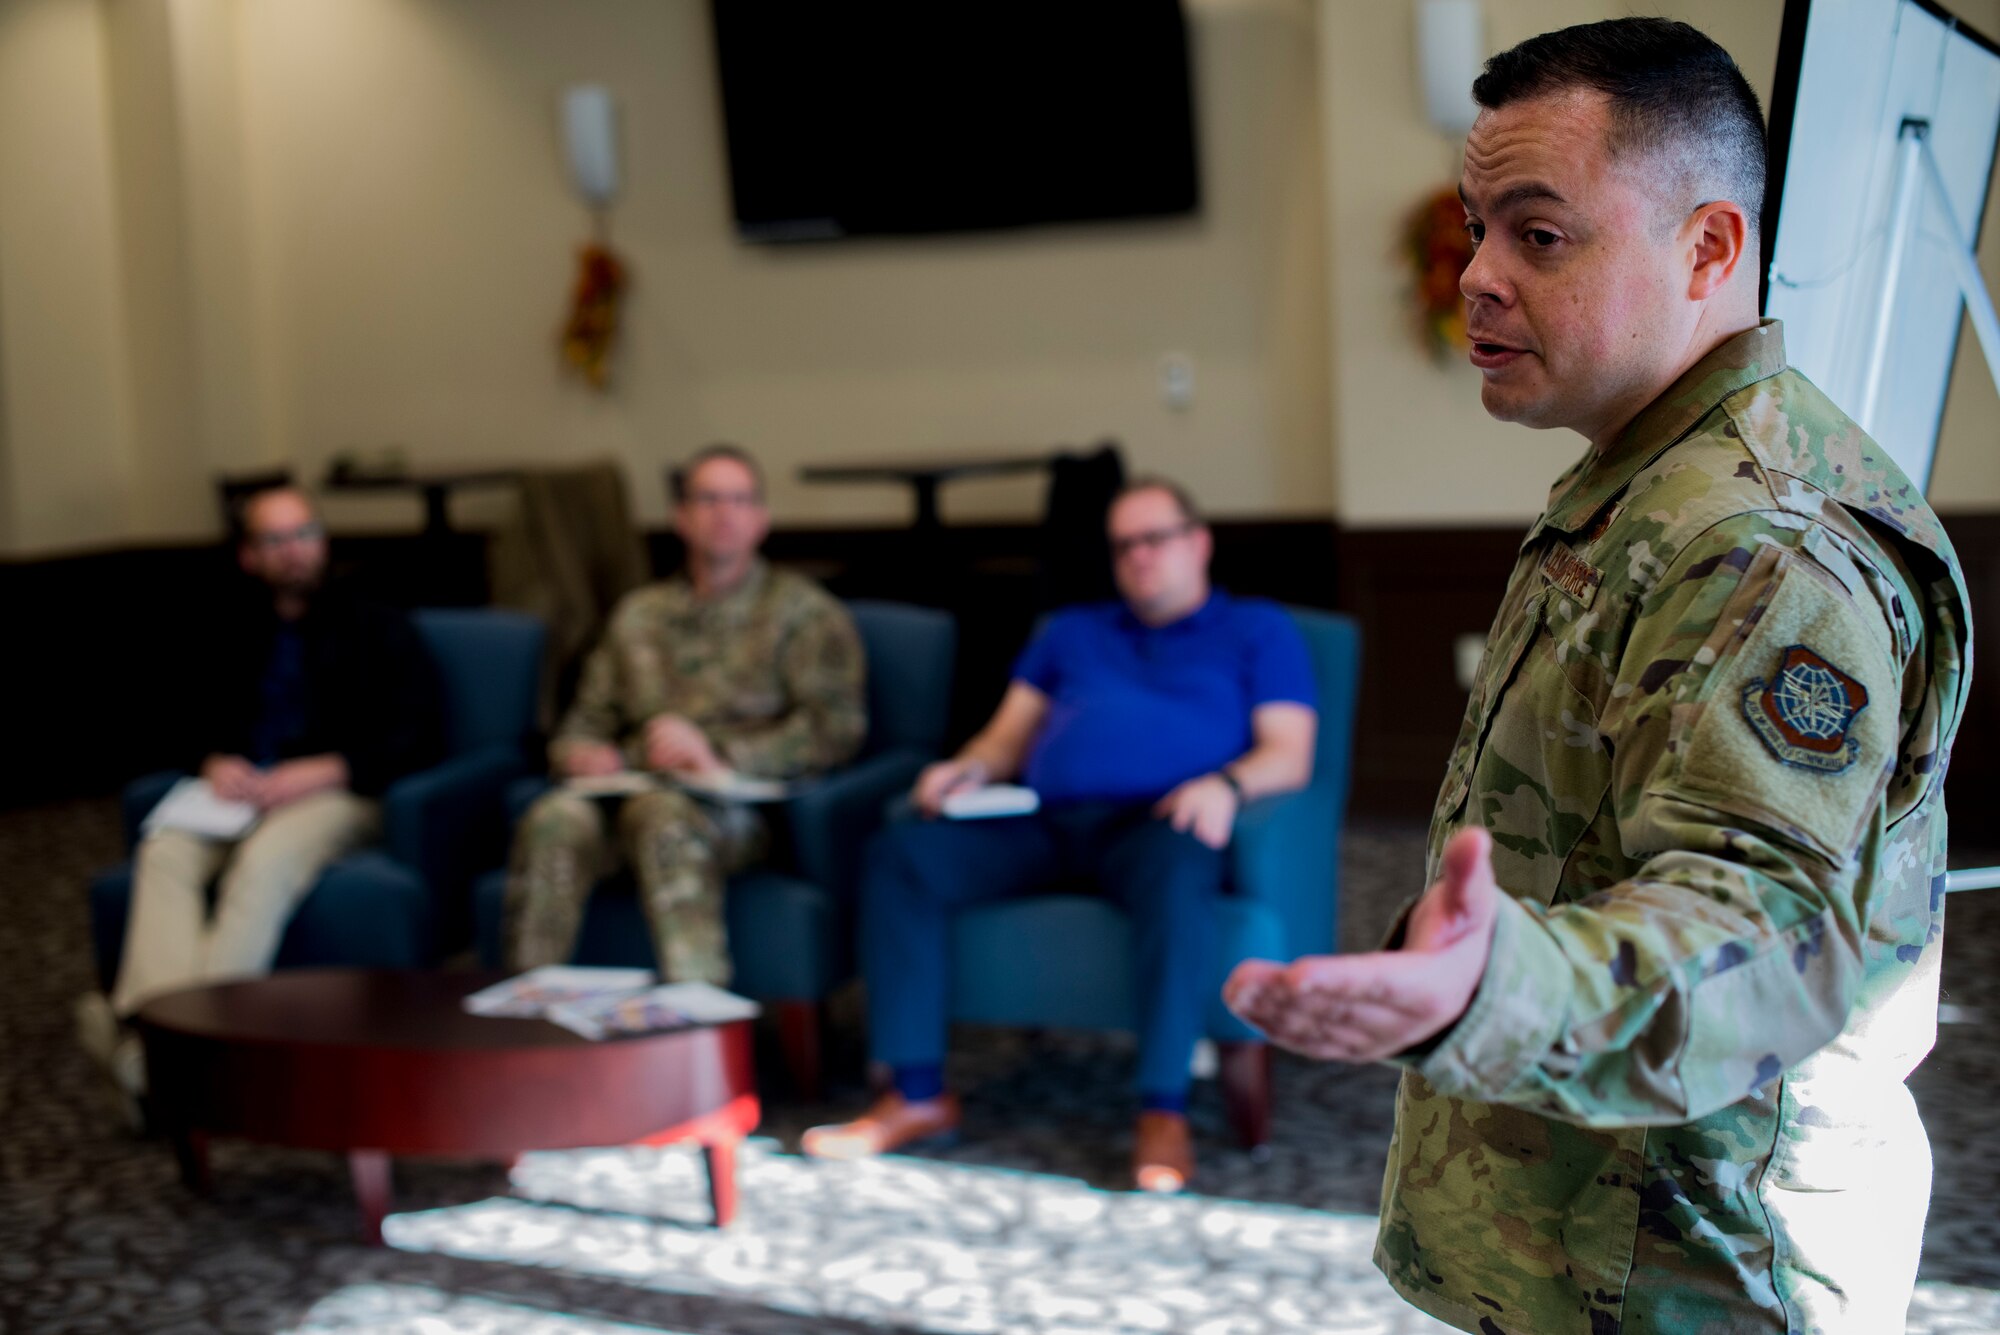 U.S. Air Force Master Sgt. David Fernandez, 92nd Logistic Readiness Squadron vehicle maintenance superintendent, pitches his idea to judges at the Energy Spark Tank forum held by the 92nd Civil Engineer Squadron at Fairchild Air Force Base, Washington, Oct. 29, 2019. Similar to Fairchild’s previous Inland Spark competition that focused on innovation, the 92nd CES Spark Tank focused on energy initiatives that propel Fairchild to continue being Green in 19. (U.S. Air Force photo by Airman 1st Class Lawrence Sena)